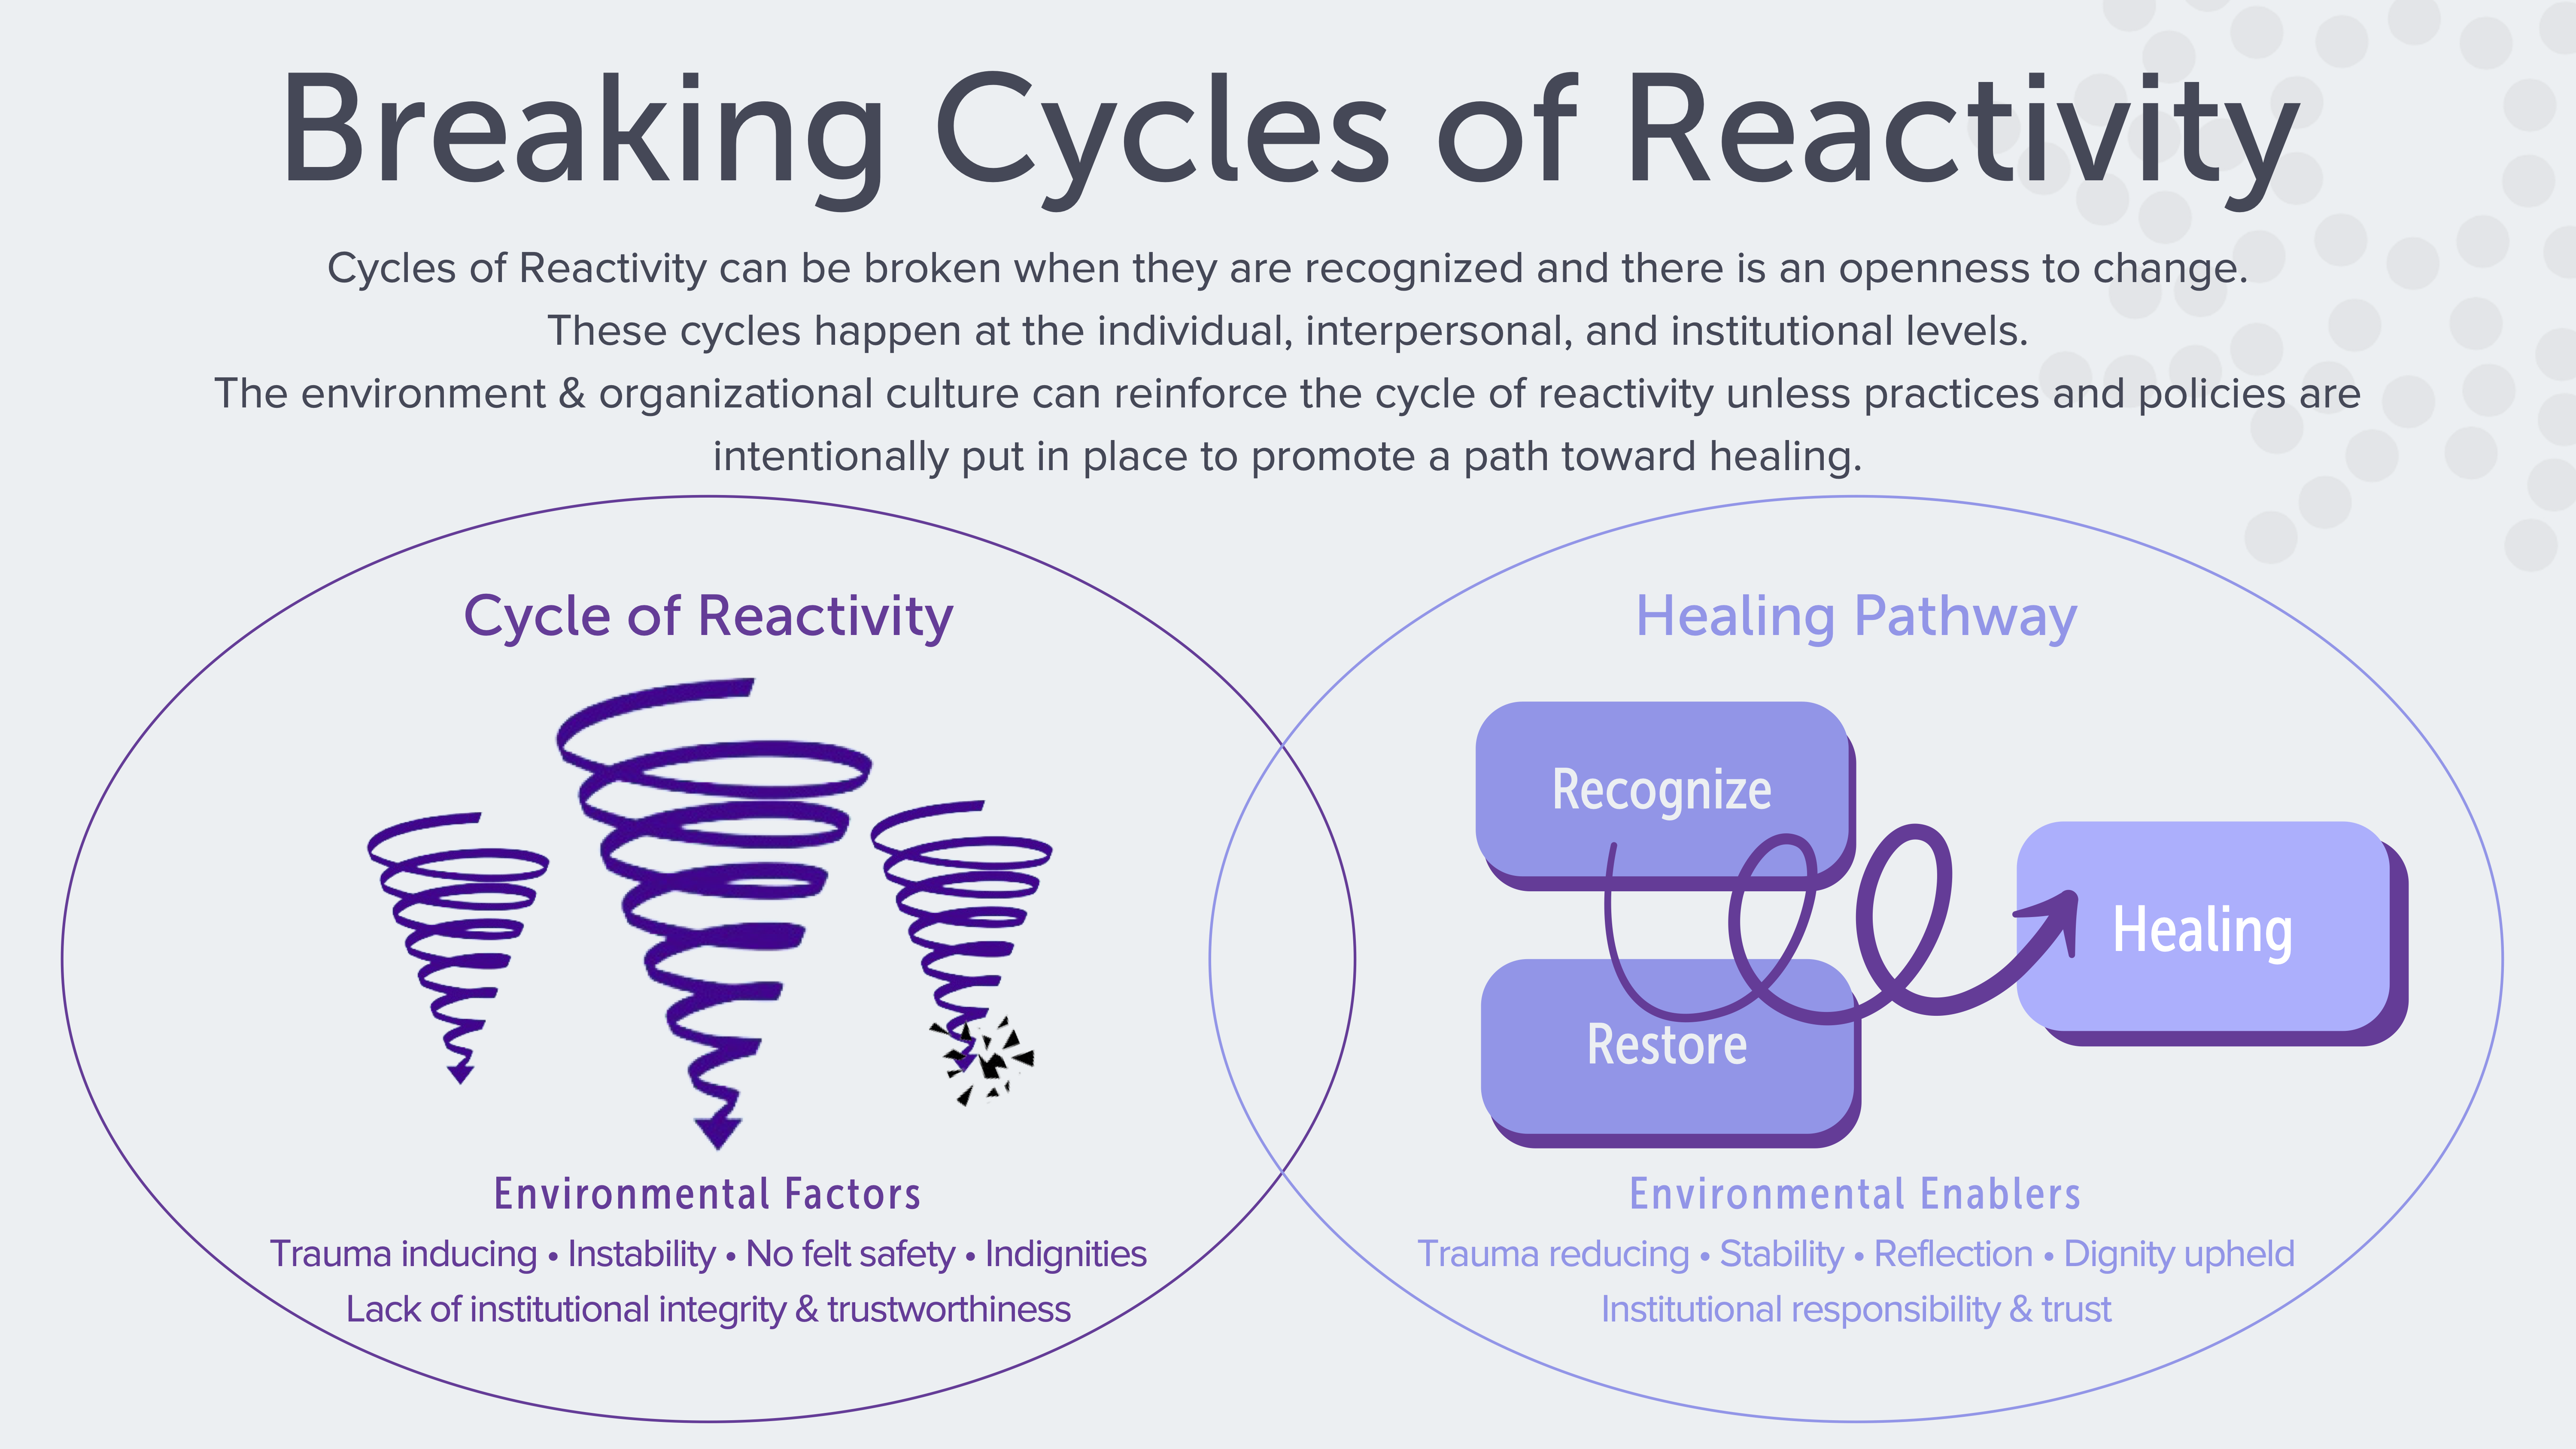 Breaking Cycles of Reactivity - RBN graphic from 09-2023 Webinar